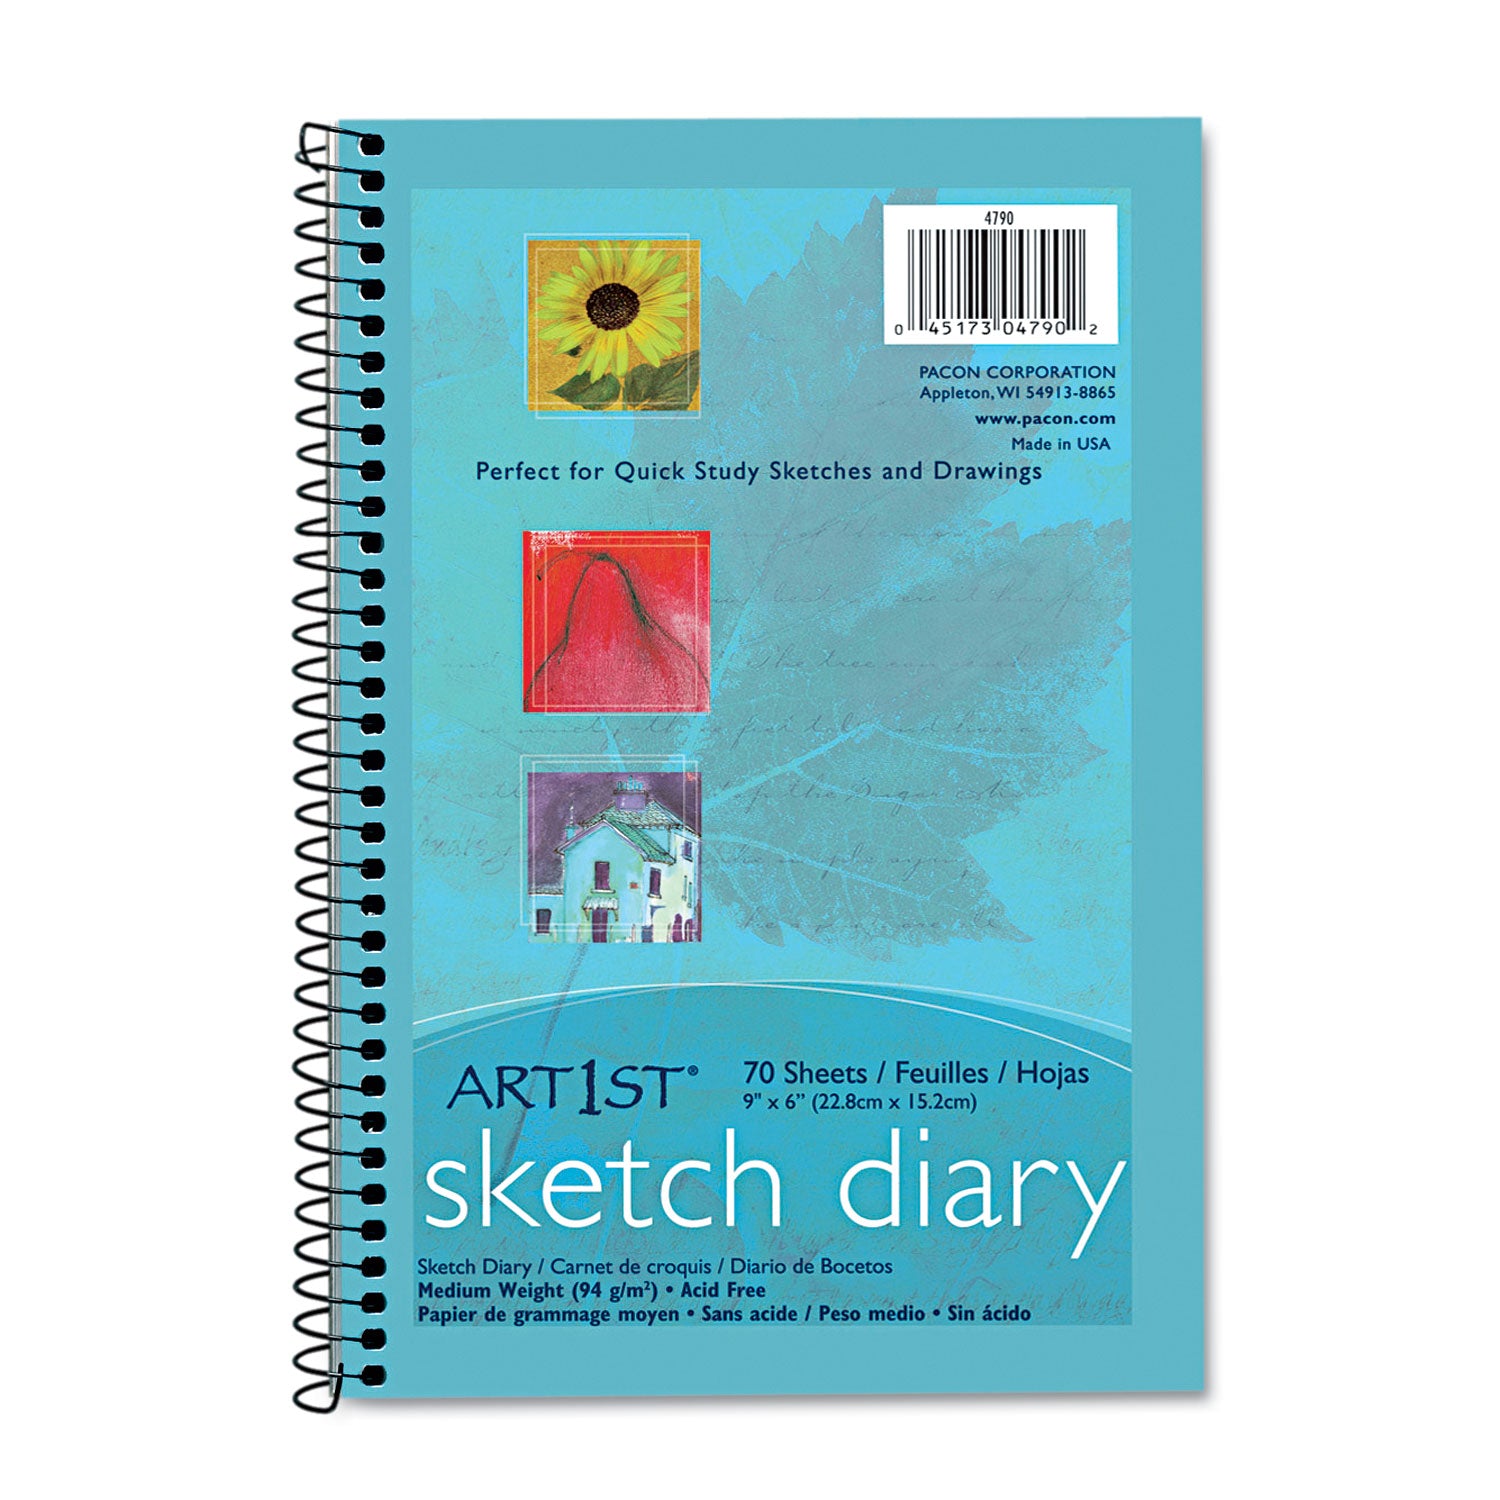 Art1st Sketch Diary, 64 lb Text Paper Stock, Blue Cover, (70) 9 x 6 Sheets - 